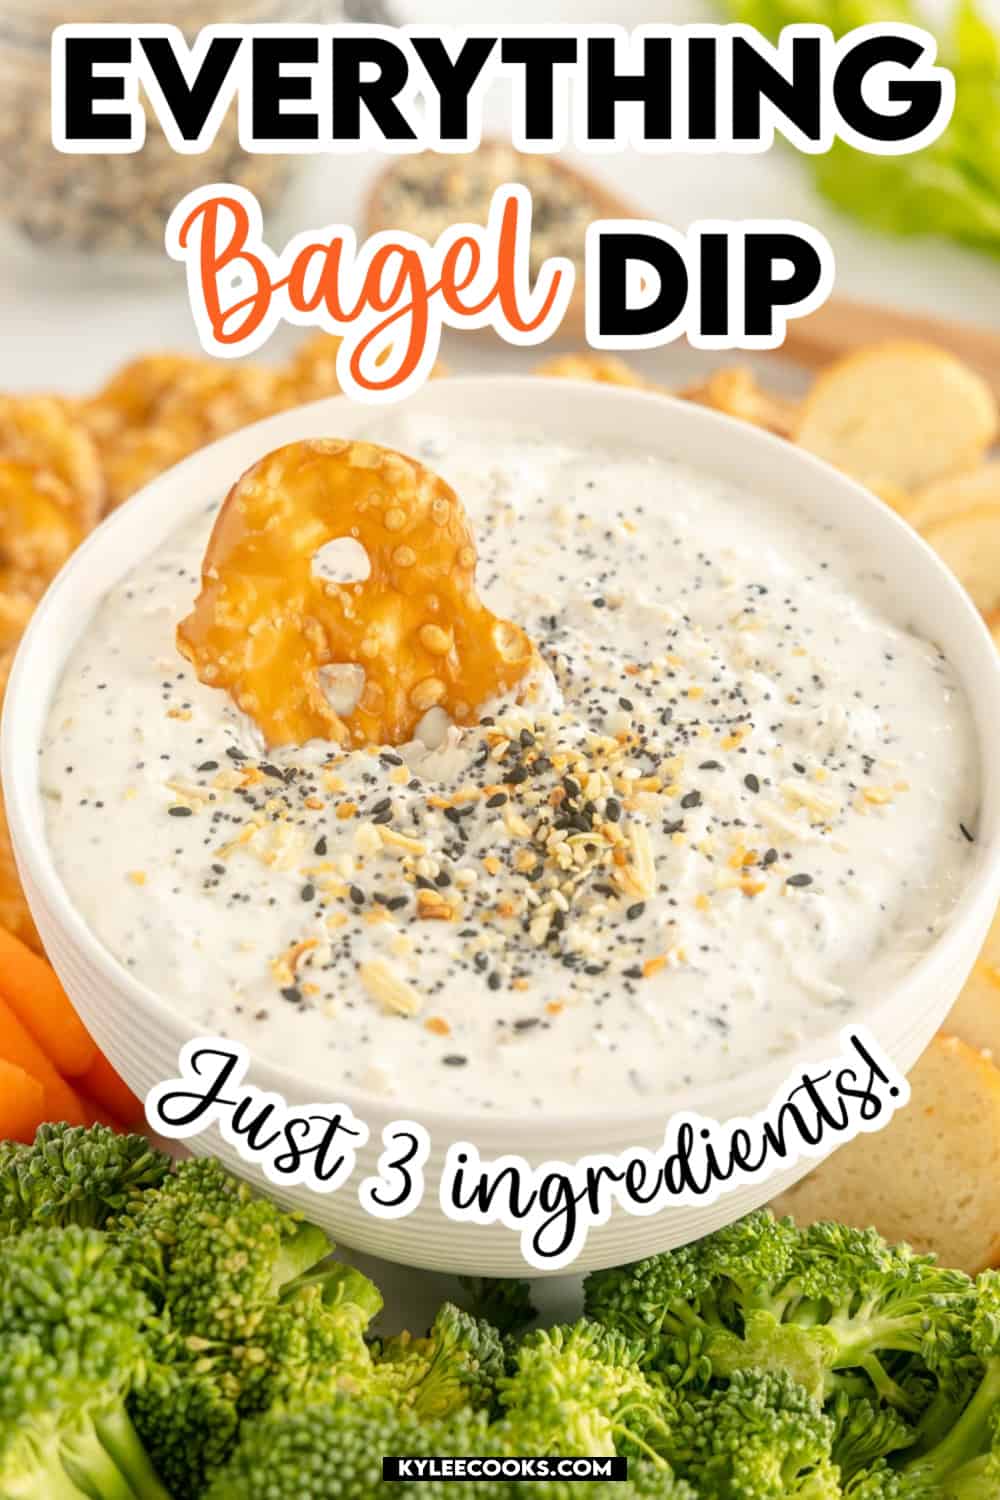 a bowl of everything bagel dip with recipe name and ingredients overlaid in text.